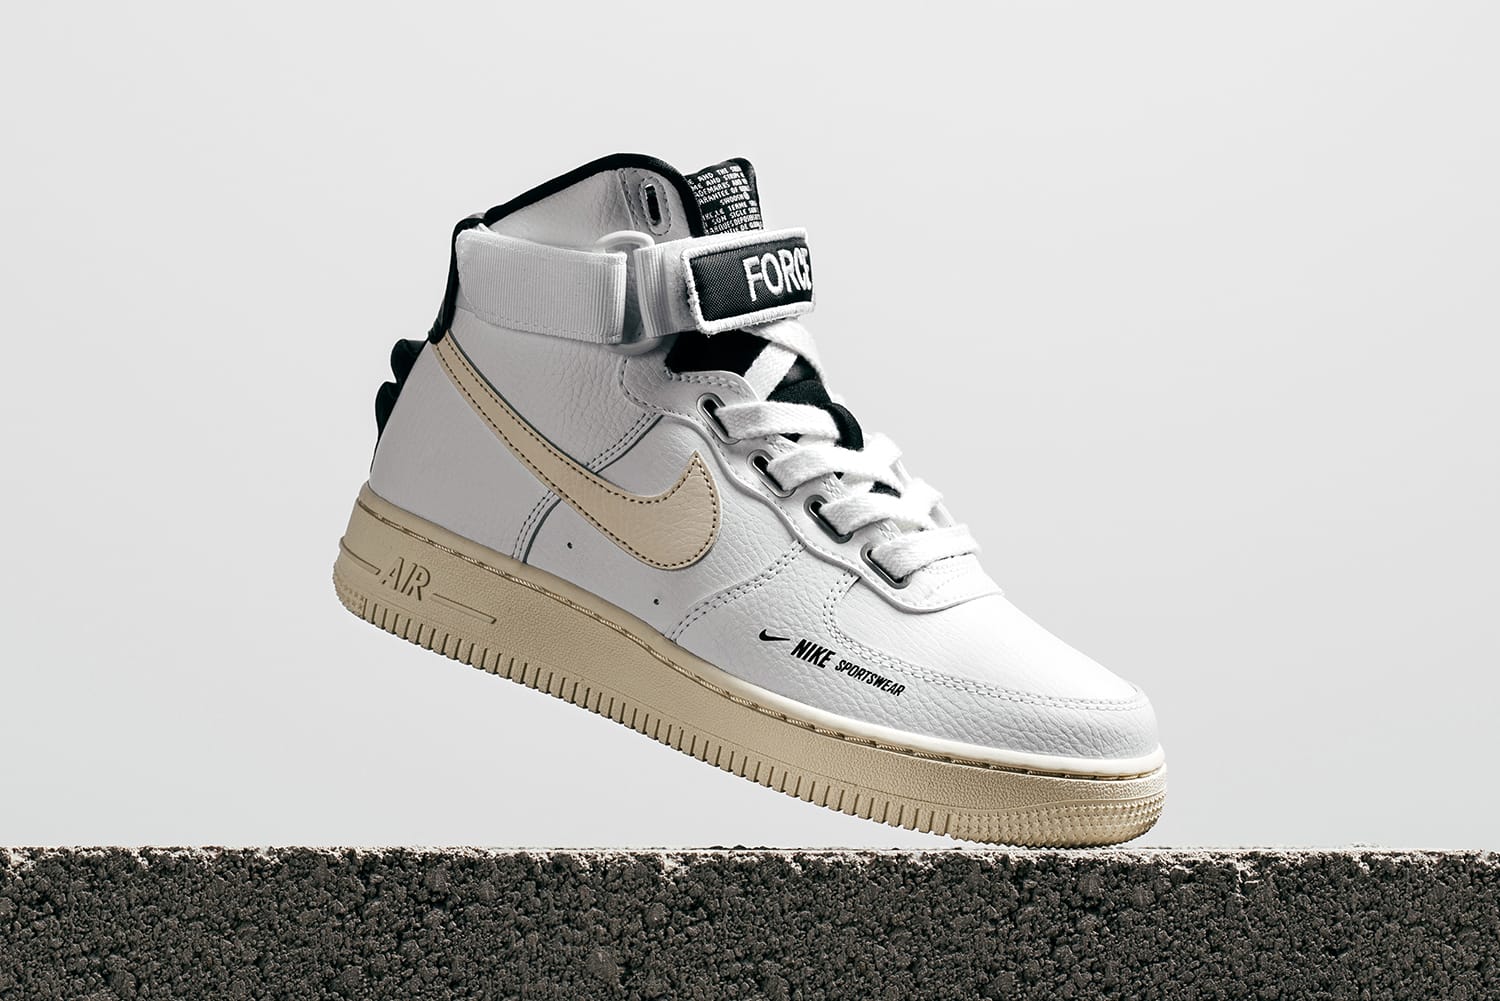 nike white air force 1 high utility trainers